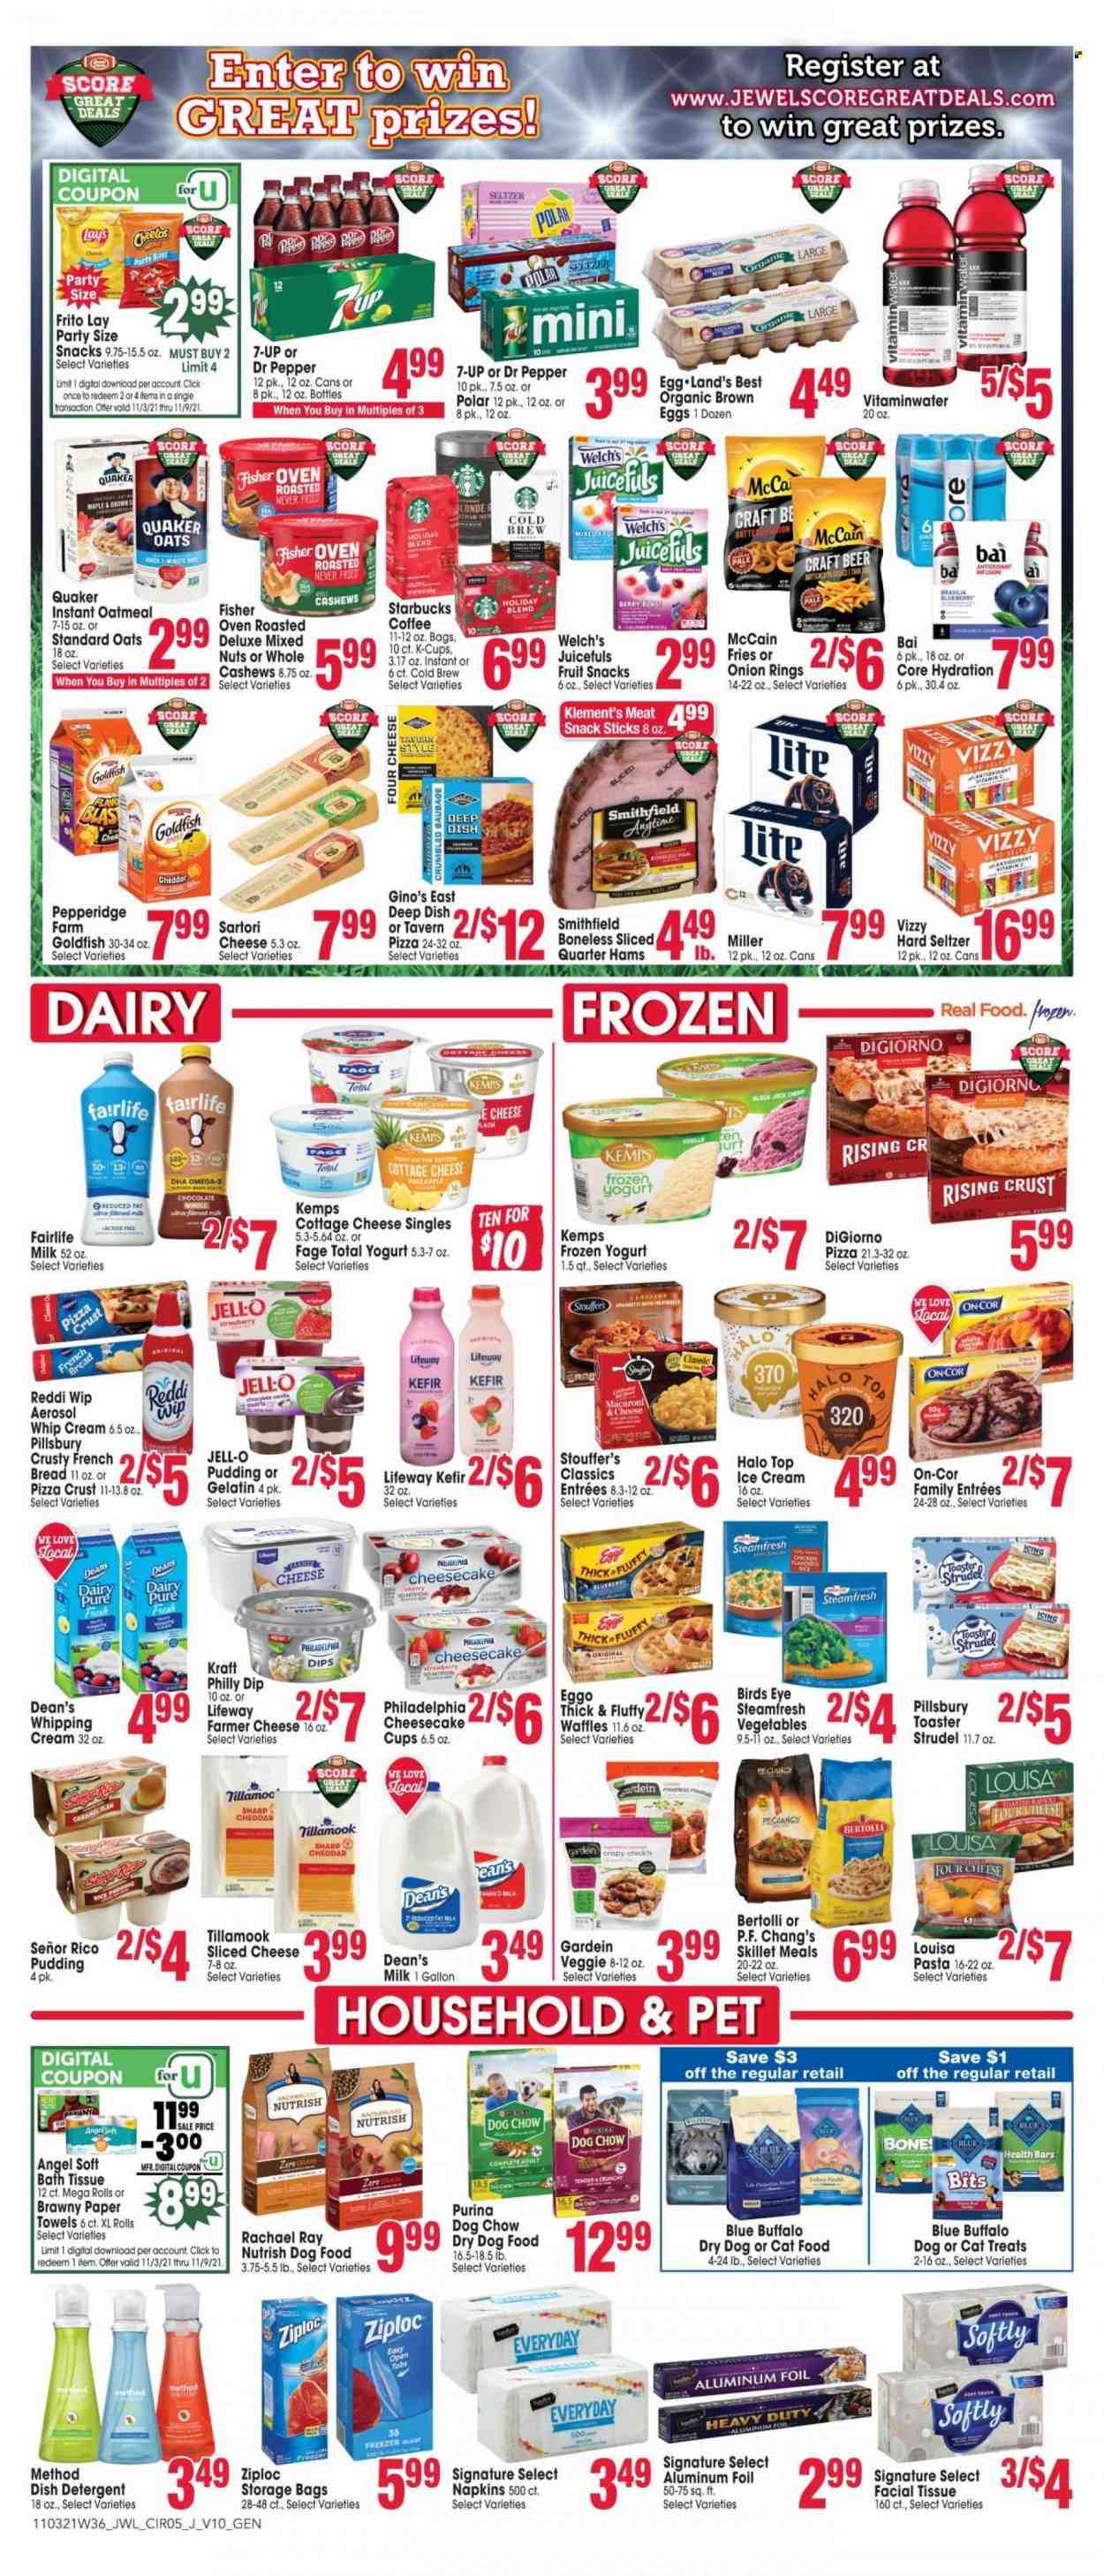 thumbnail - Jewel Osco Flyer - 11/03/2021 - 11/09/2021 - Sales products - bread, strudel, french bread, waffles, cherries, Welch's, pizza, onion rings, pasta, Pillsbury, Bird's Eye, Quaker, Kraft®, Bertolli, sausage, cottage cheese, farmer cheese, sliced cheese, Philadelphia, Kemps, pudding, yoghurt, milk, kefir, eggs, whipping cream, dip, ice cream, Stouffer's, McCain, potato fries, fruit snack, Lay’s, Goldfish, oatmeal, oats, Jell-O, cashews, mixed nuts, Dr. Pepper, 7UP, coffee, Starbucks, coffee capsules, K-Cups, Hard Seltzer, beer, Miller, napkins, bath tissue, kitchen towels, paper towels, detergent, Ziploc, storage bag, aluminium foil, animal food, Blue Buffalo, cat food, dog food, Dog Chow, Purina, dry dog food, Nutrish, vitamin c. Page 5.